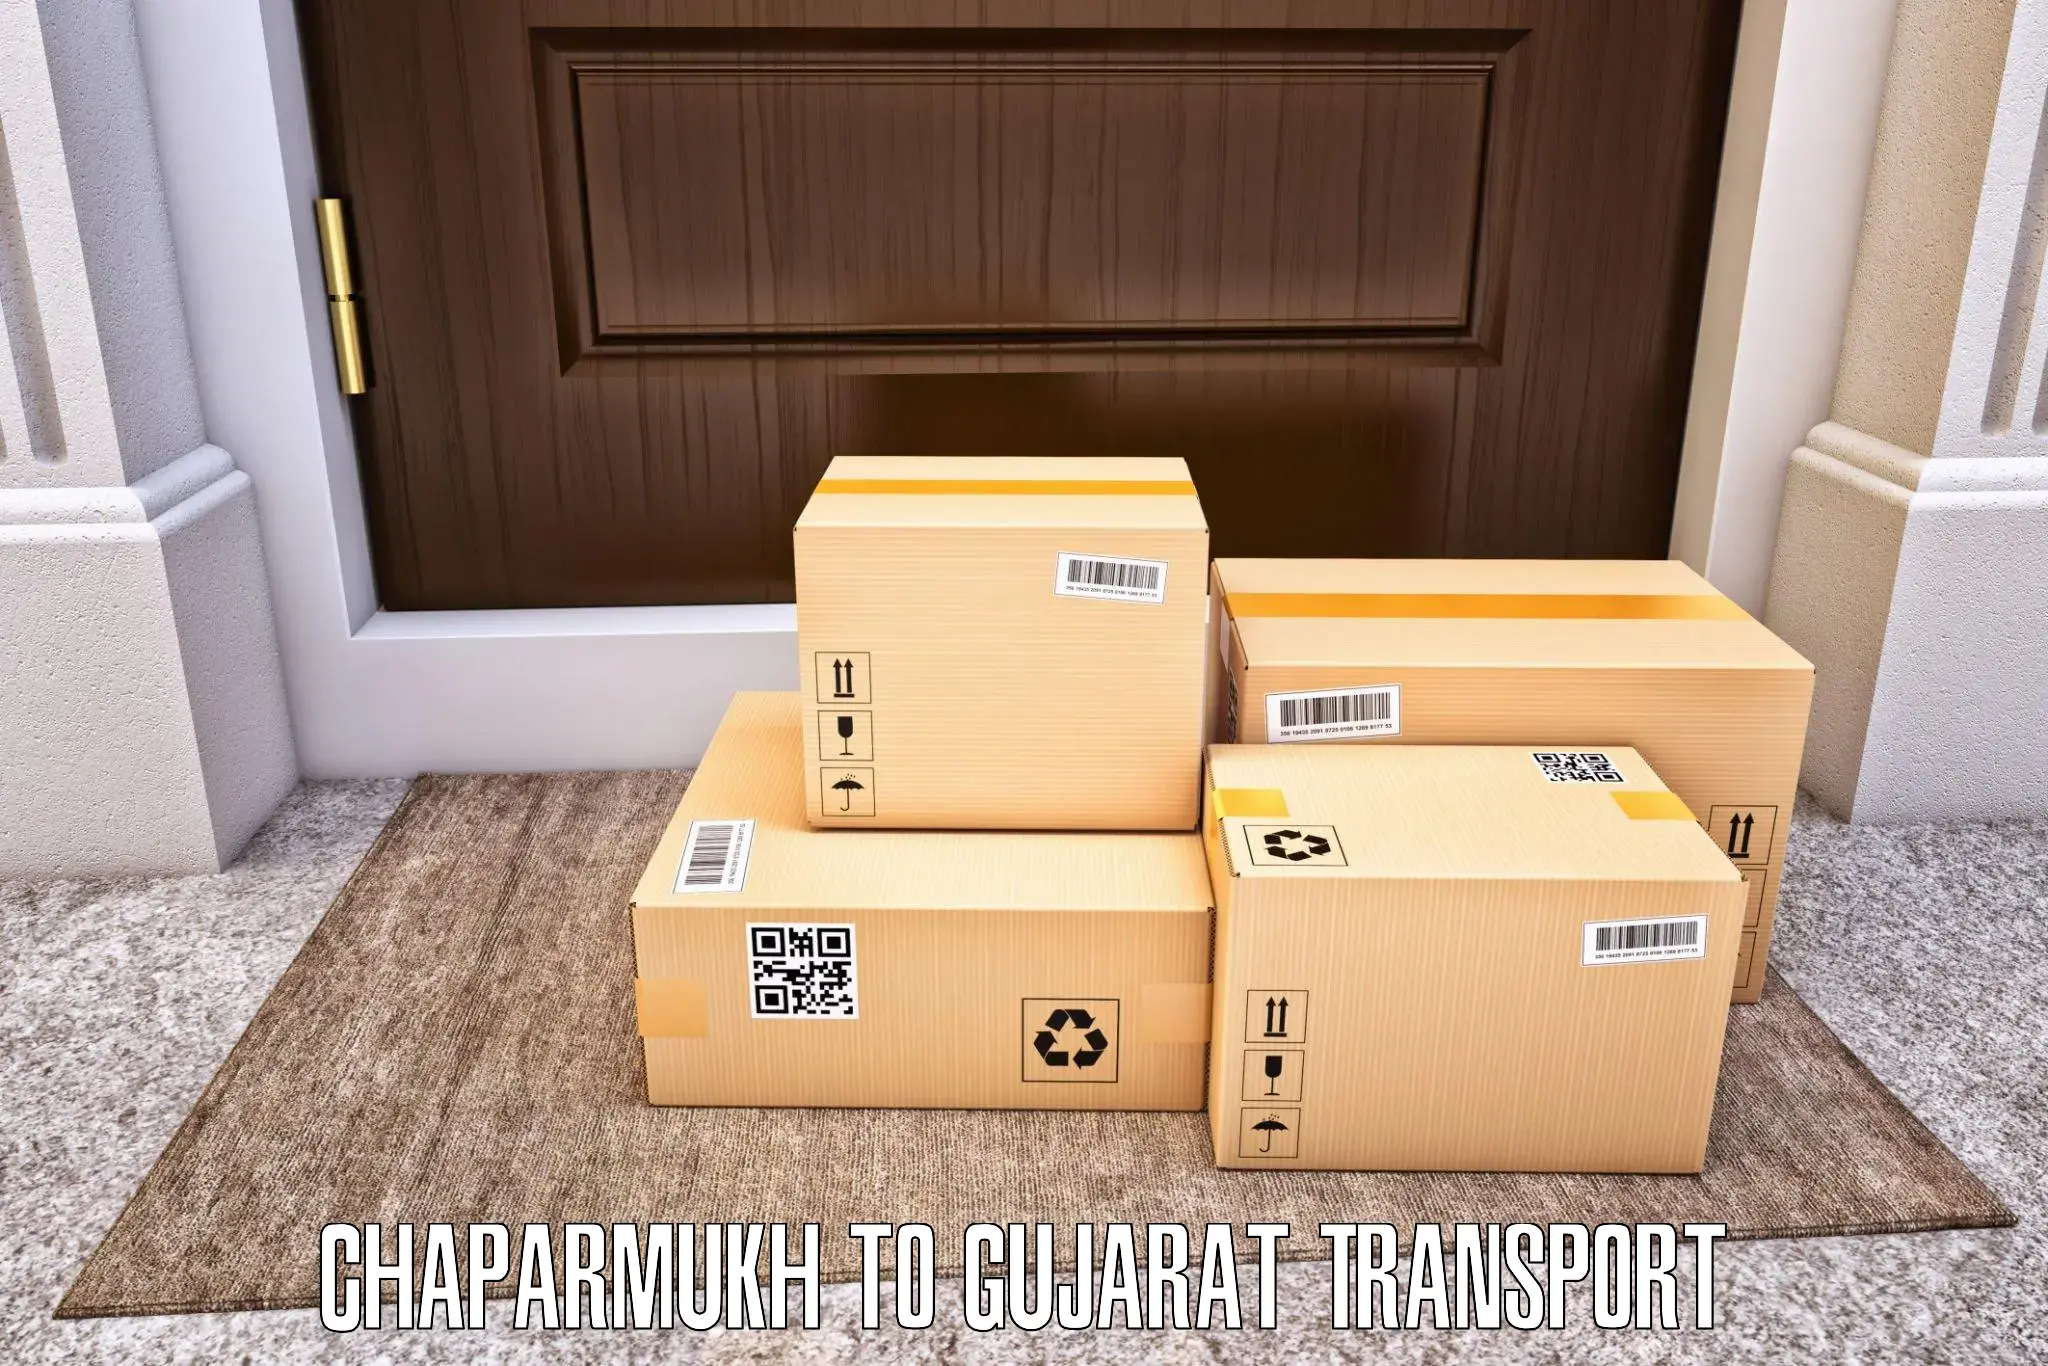 Transport services Chaparmukh to Songadh